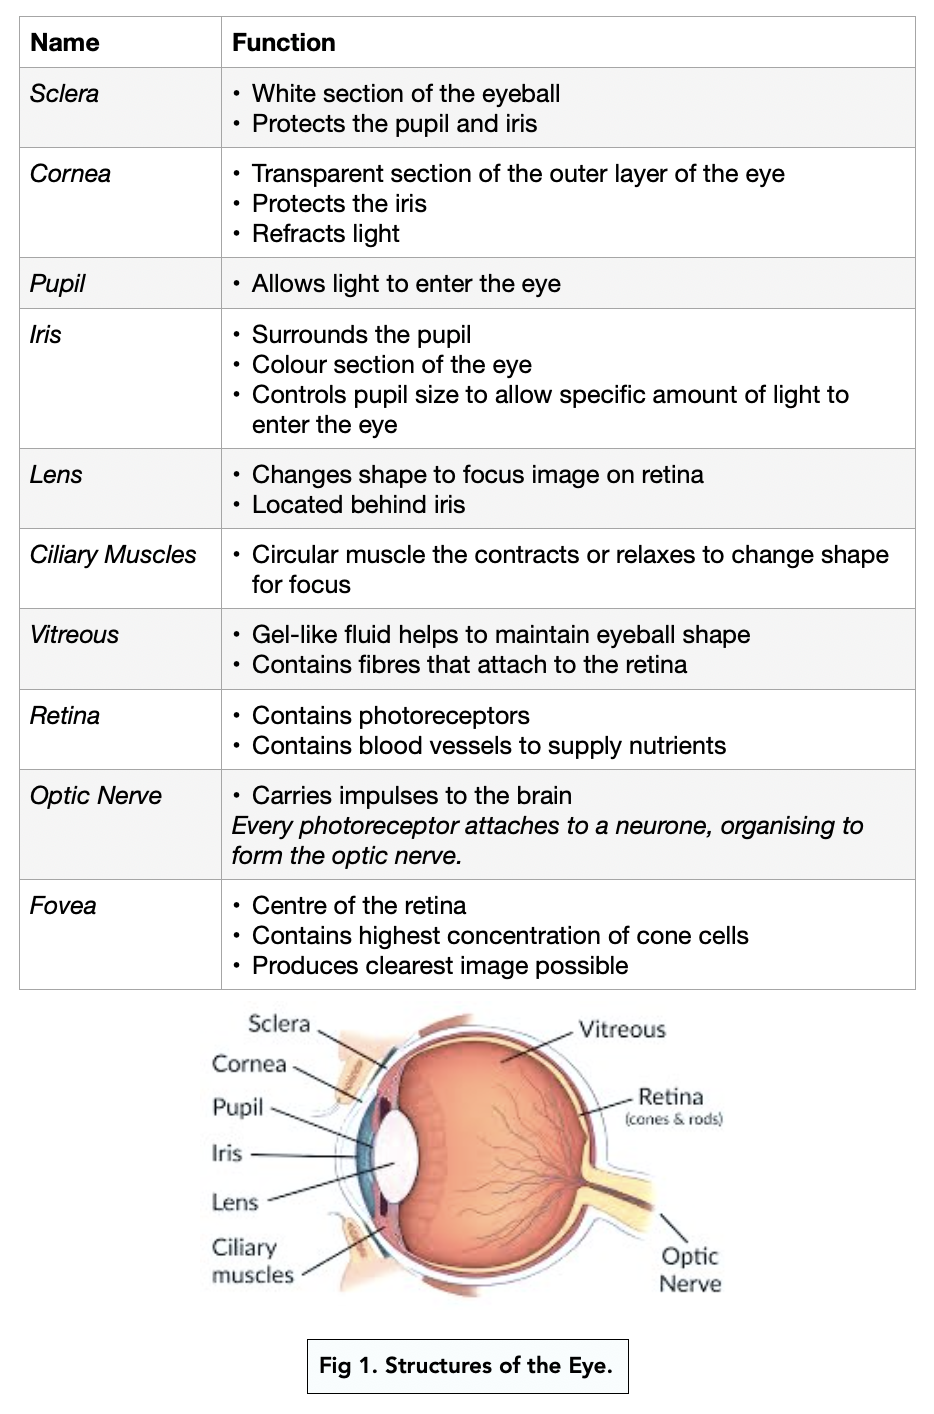 Iris of the Eye, Definition, Function & Parts - Video & Lesson Transcript